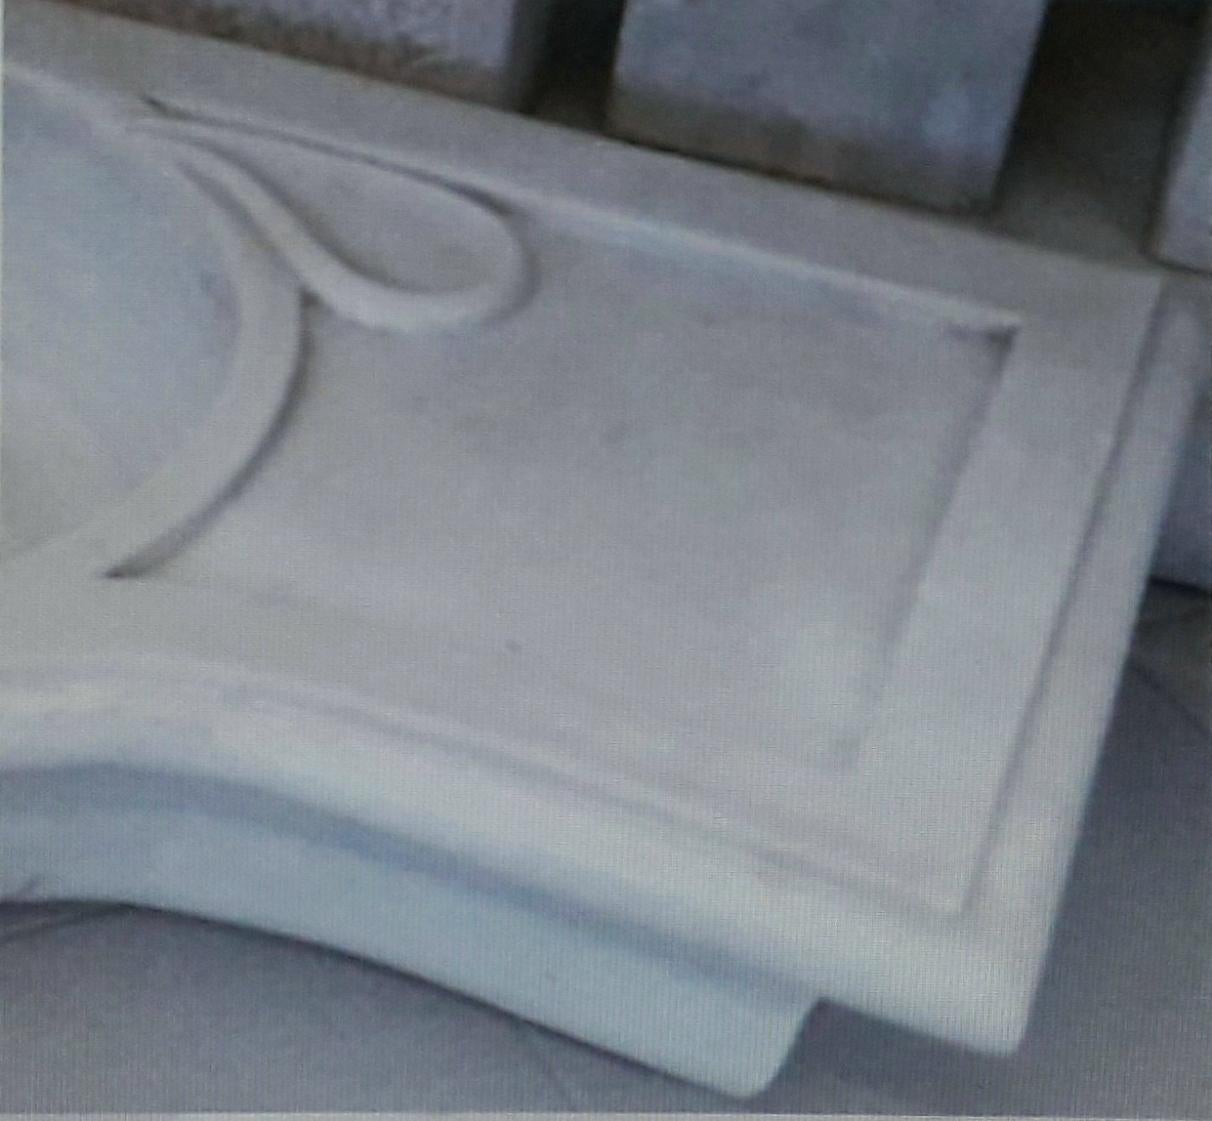 Classical Style Carved Marble Stone Sink Basin 
This timeless beautiful Italian classical sink is cut from one single block of white marble, these designs have not changed since Greek and Roman times, it carries superb artistic merit easily fitting